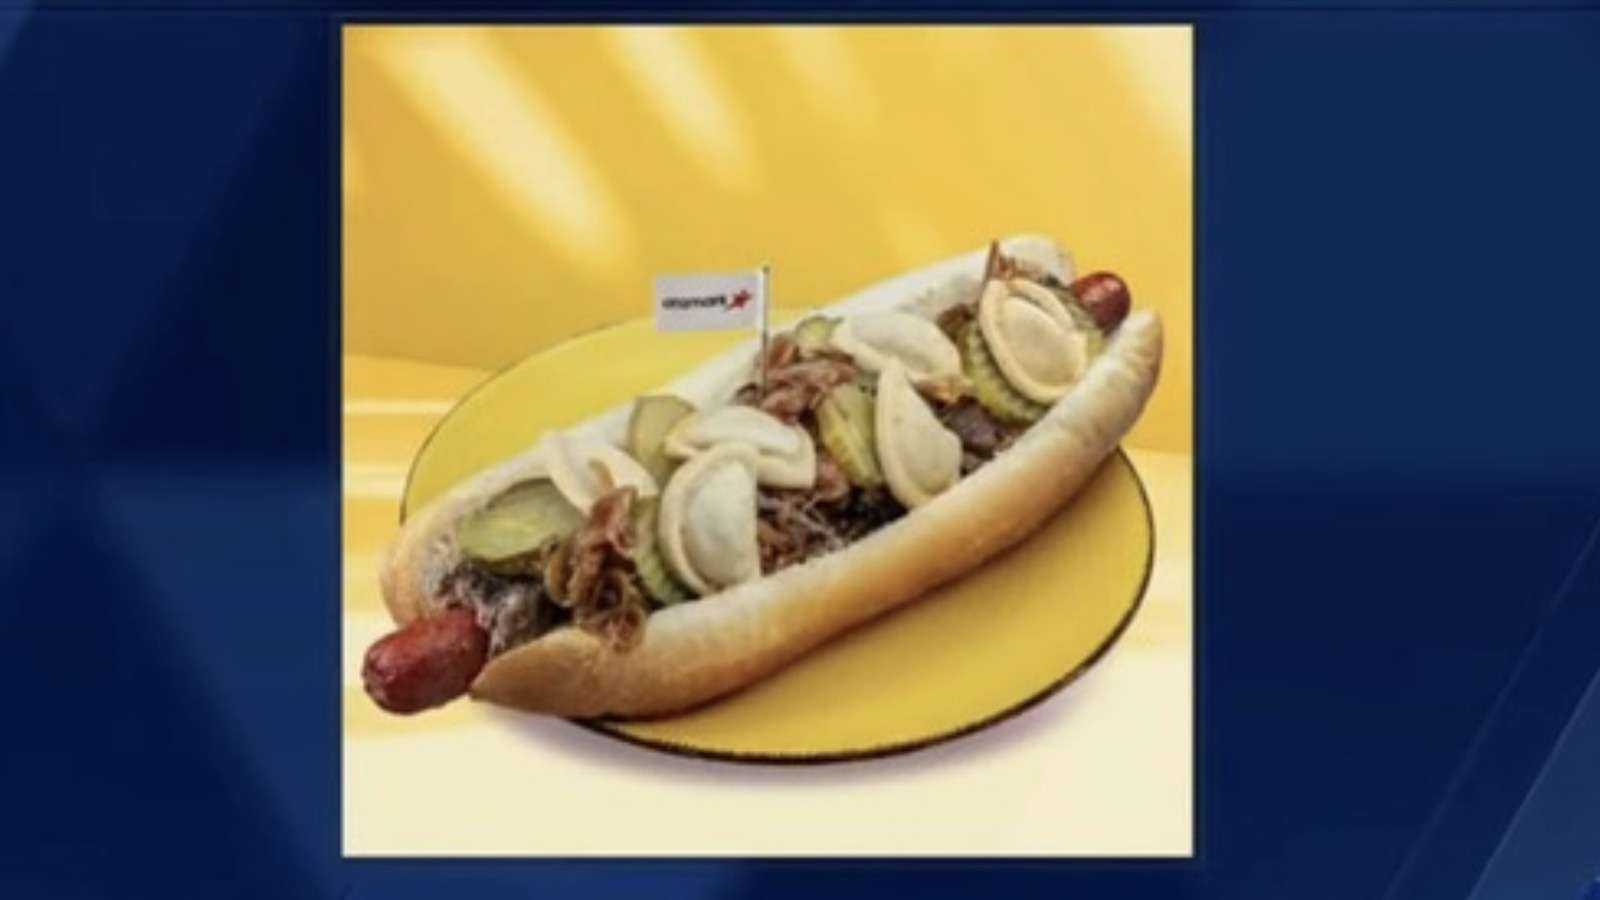 The Pirates unveiled a foot-long, pierogi-topped hot dog and fans couldn’t believe it